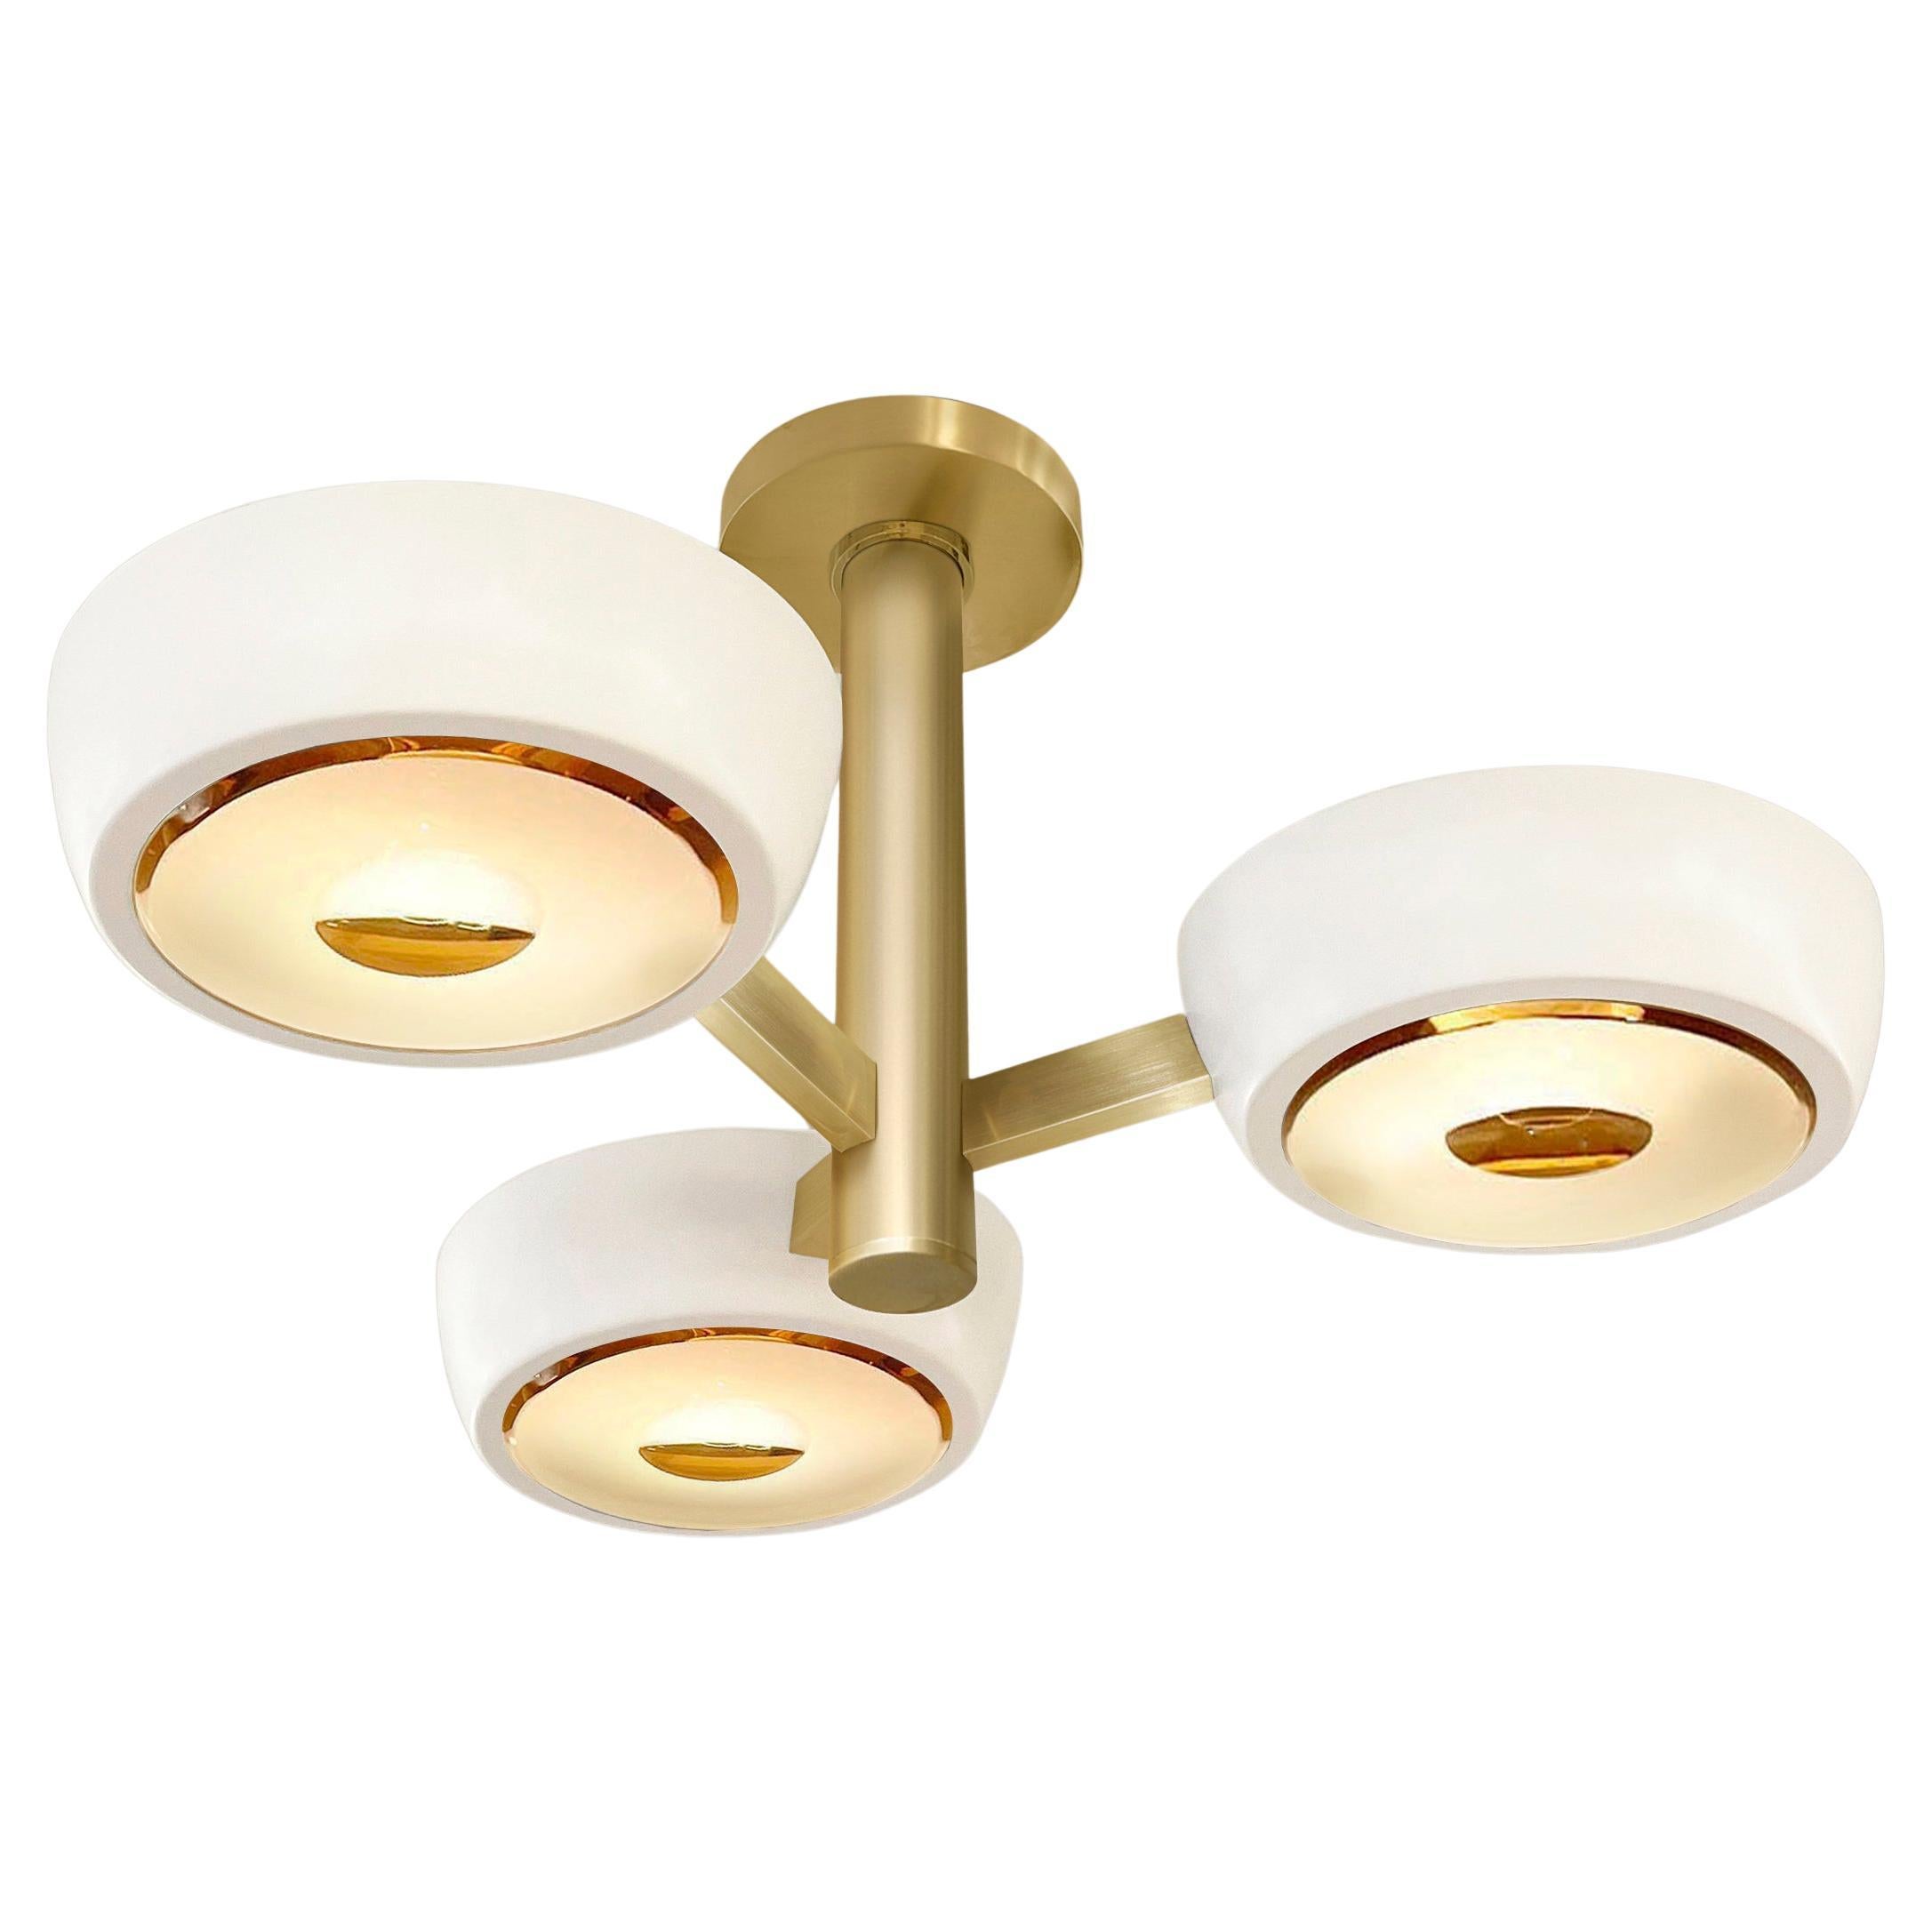 Rose Piccolo Ceiling Light by Gaspare Asaro- Rose Glass and Brass Finish For Sale